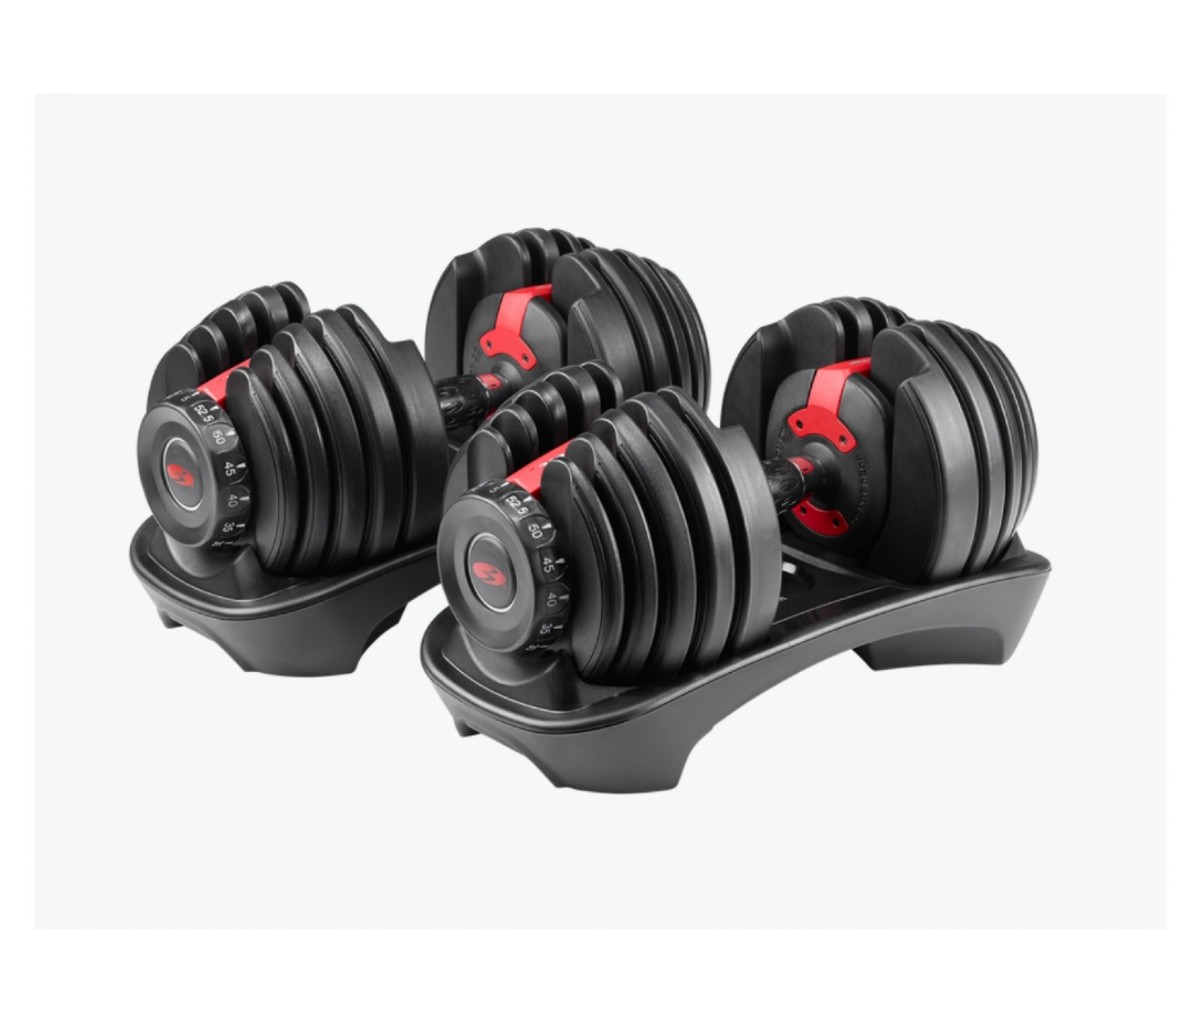 Red and black adjustable dumbbell set on a white background.